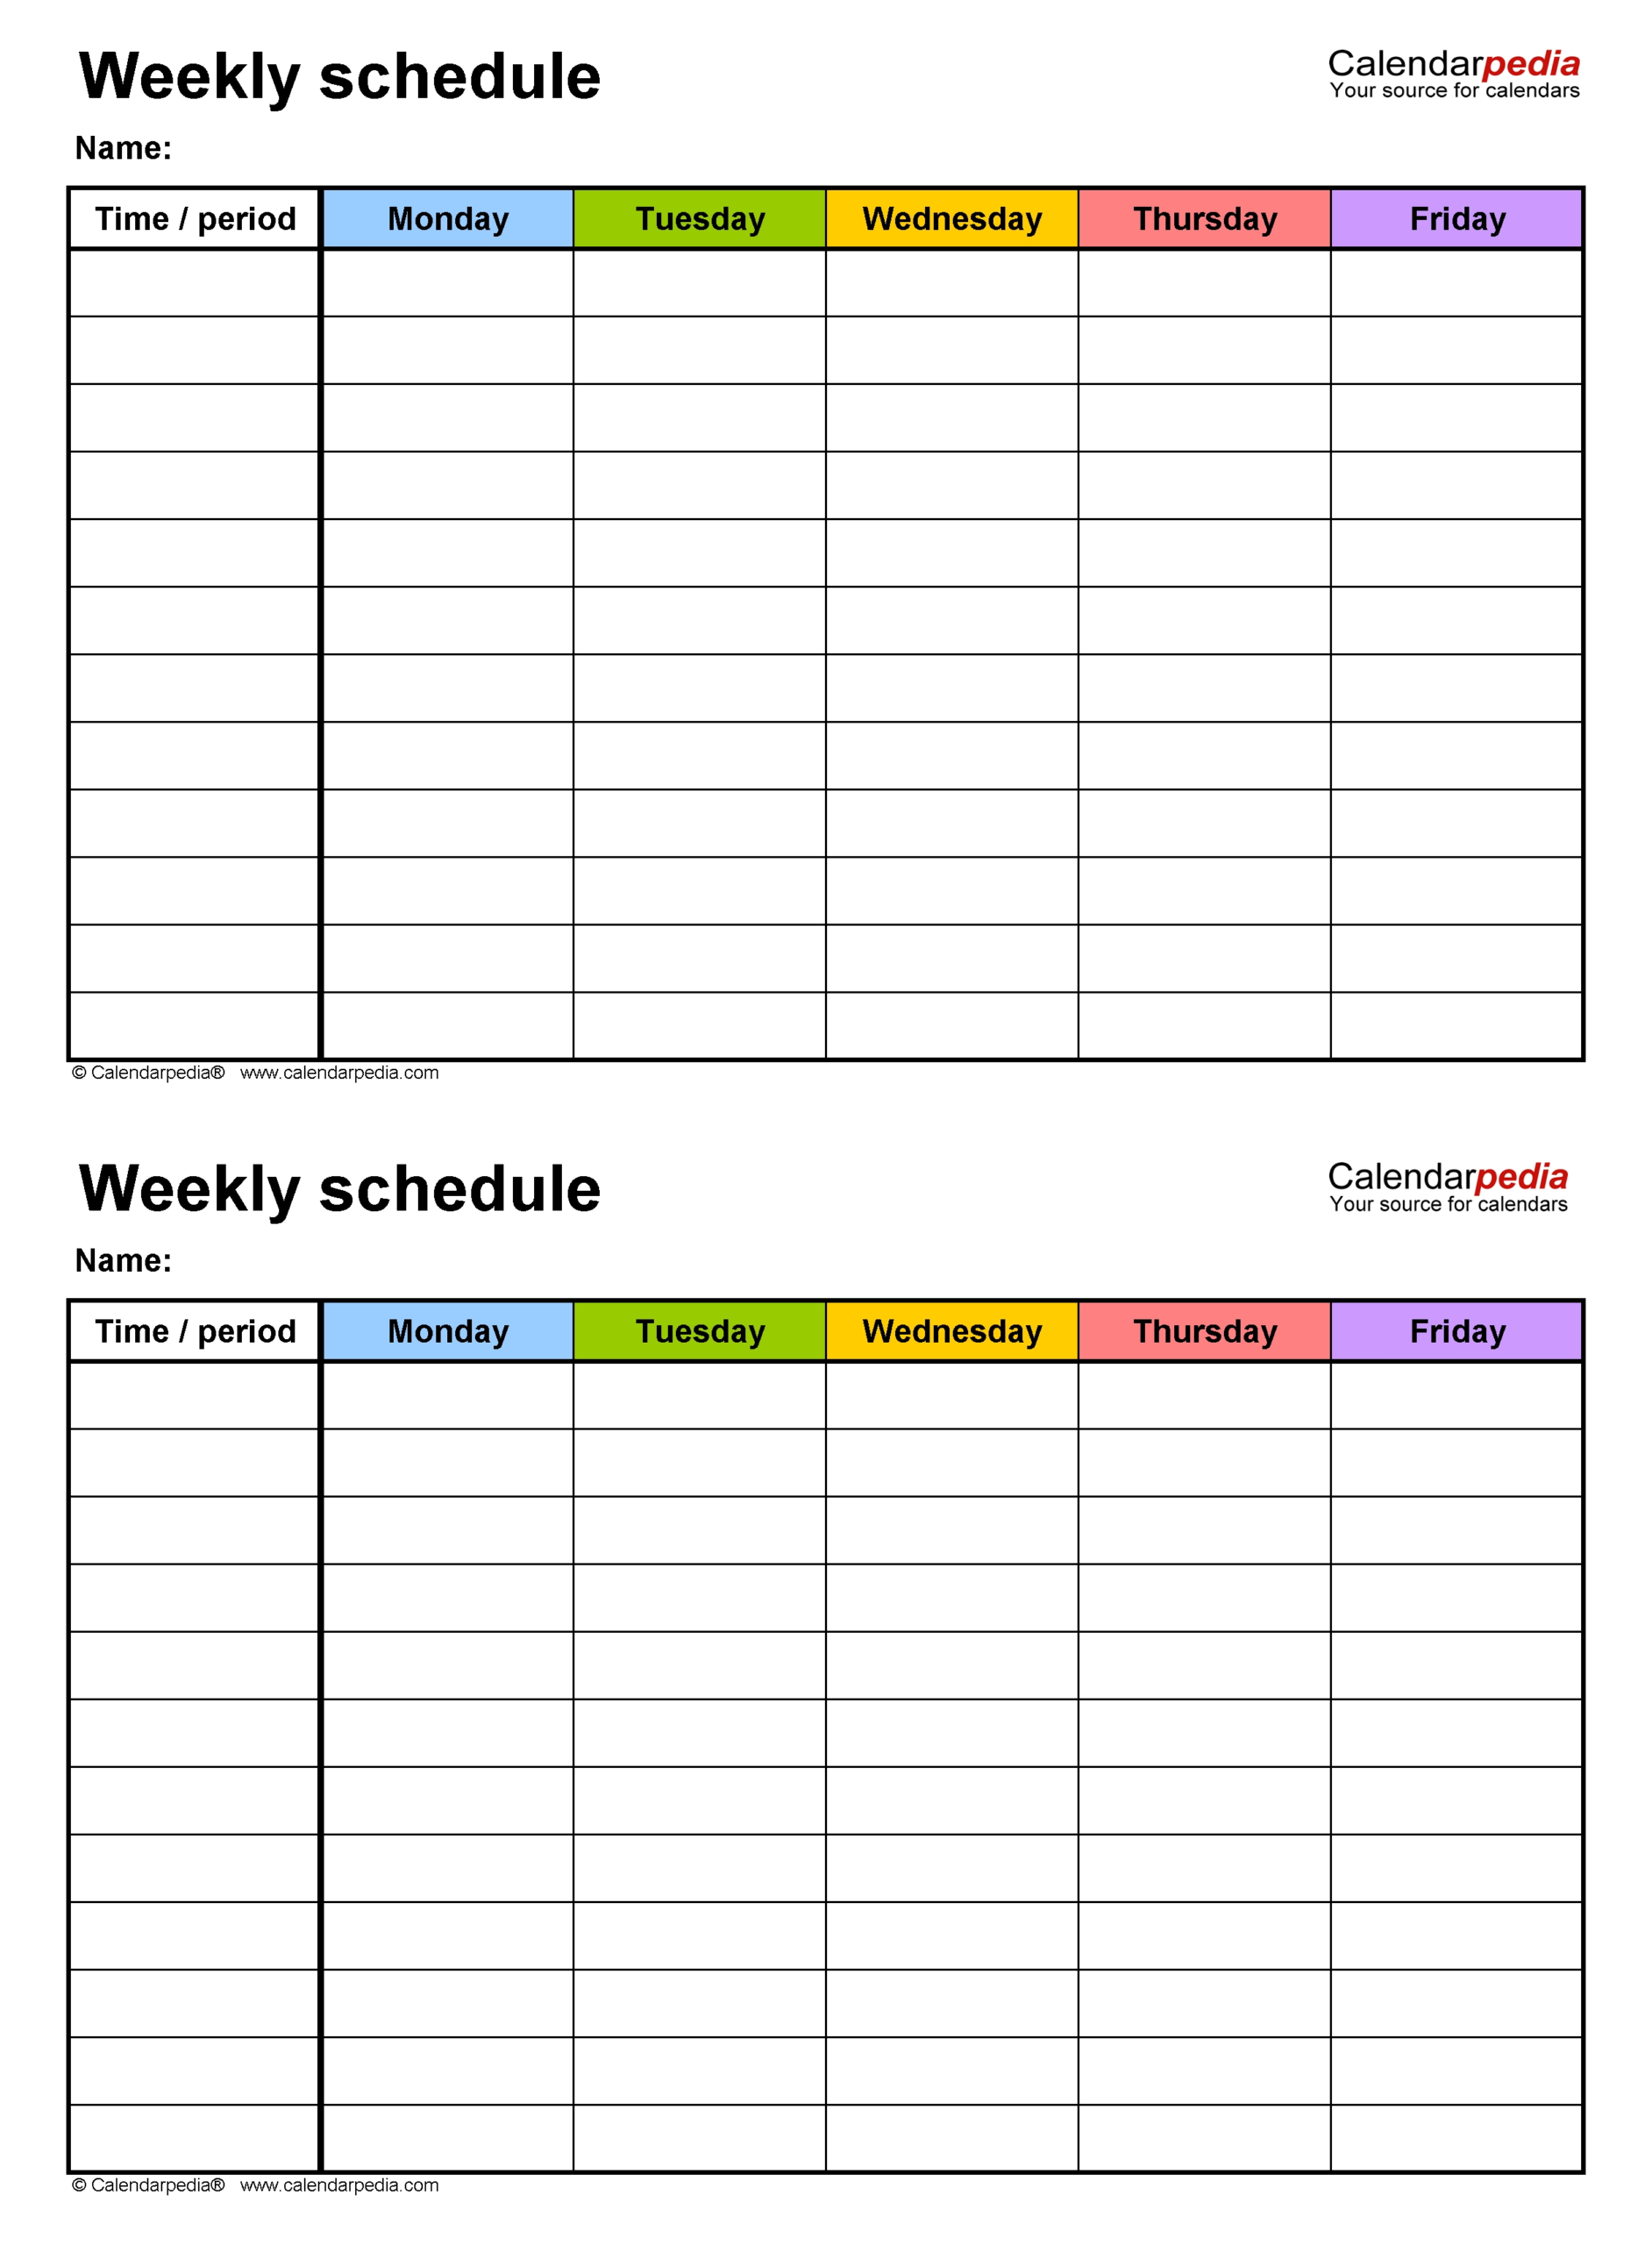 Monday To Friday Timetable Template | Calendar Template